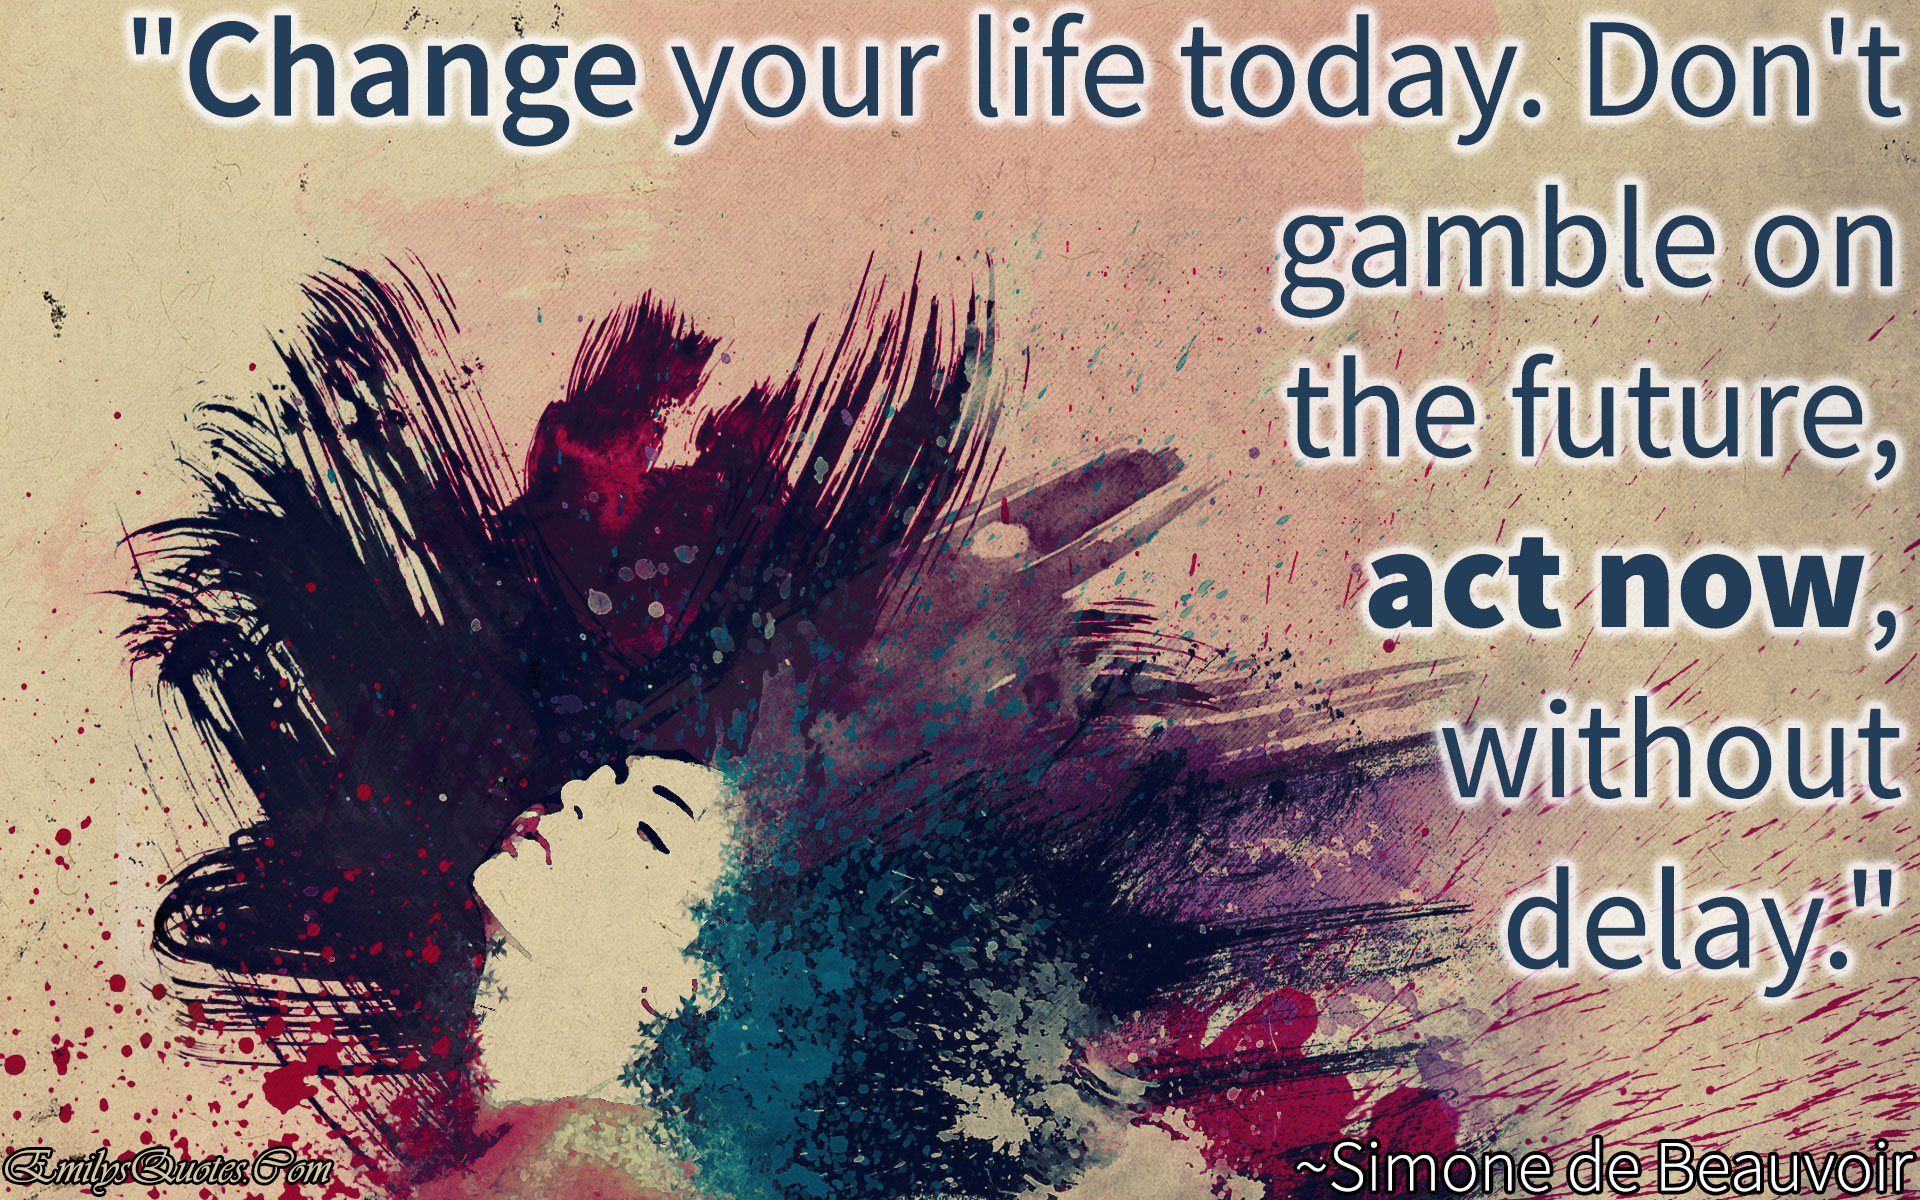 Change your life today. Don’t gamble on the future, act now, without delay